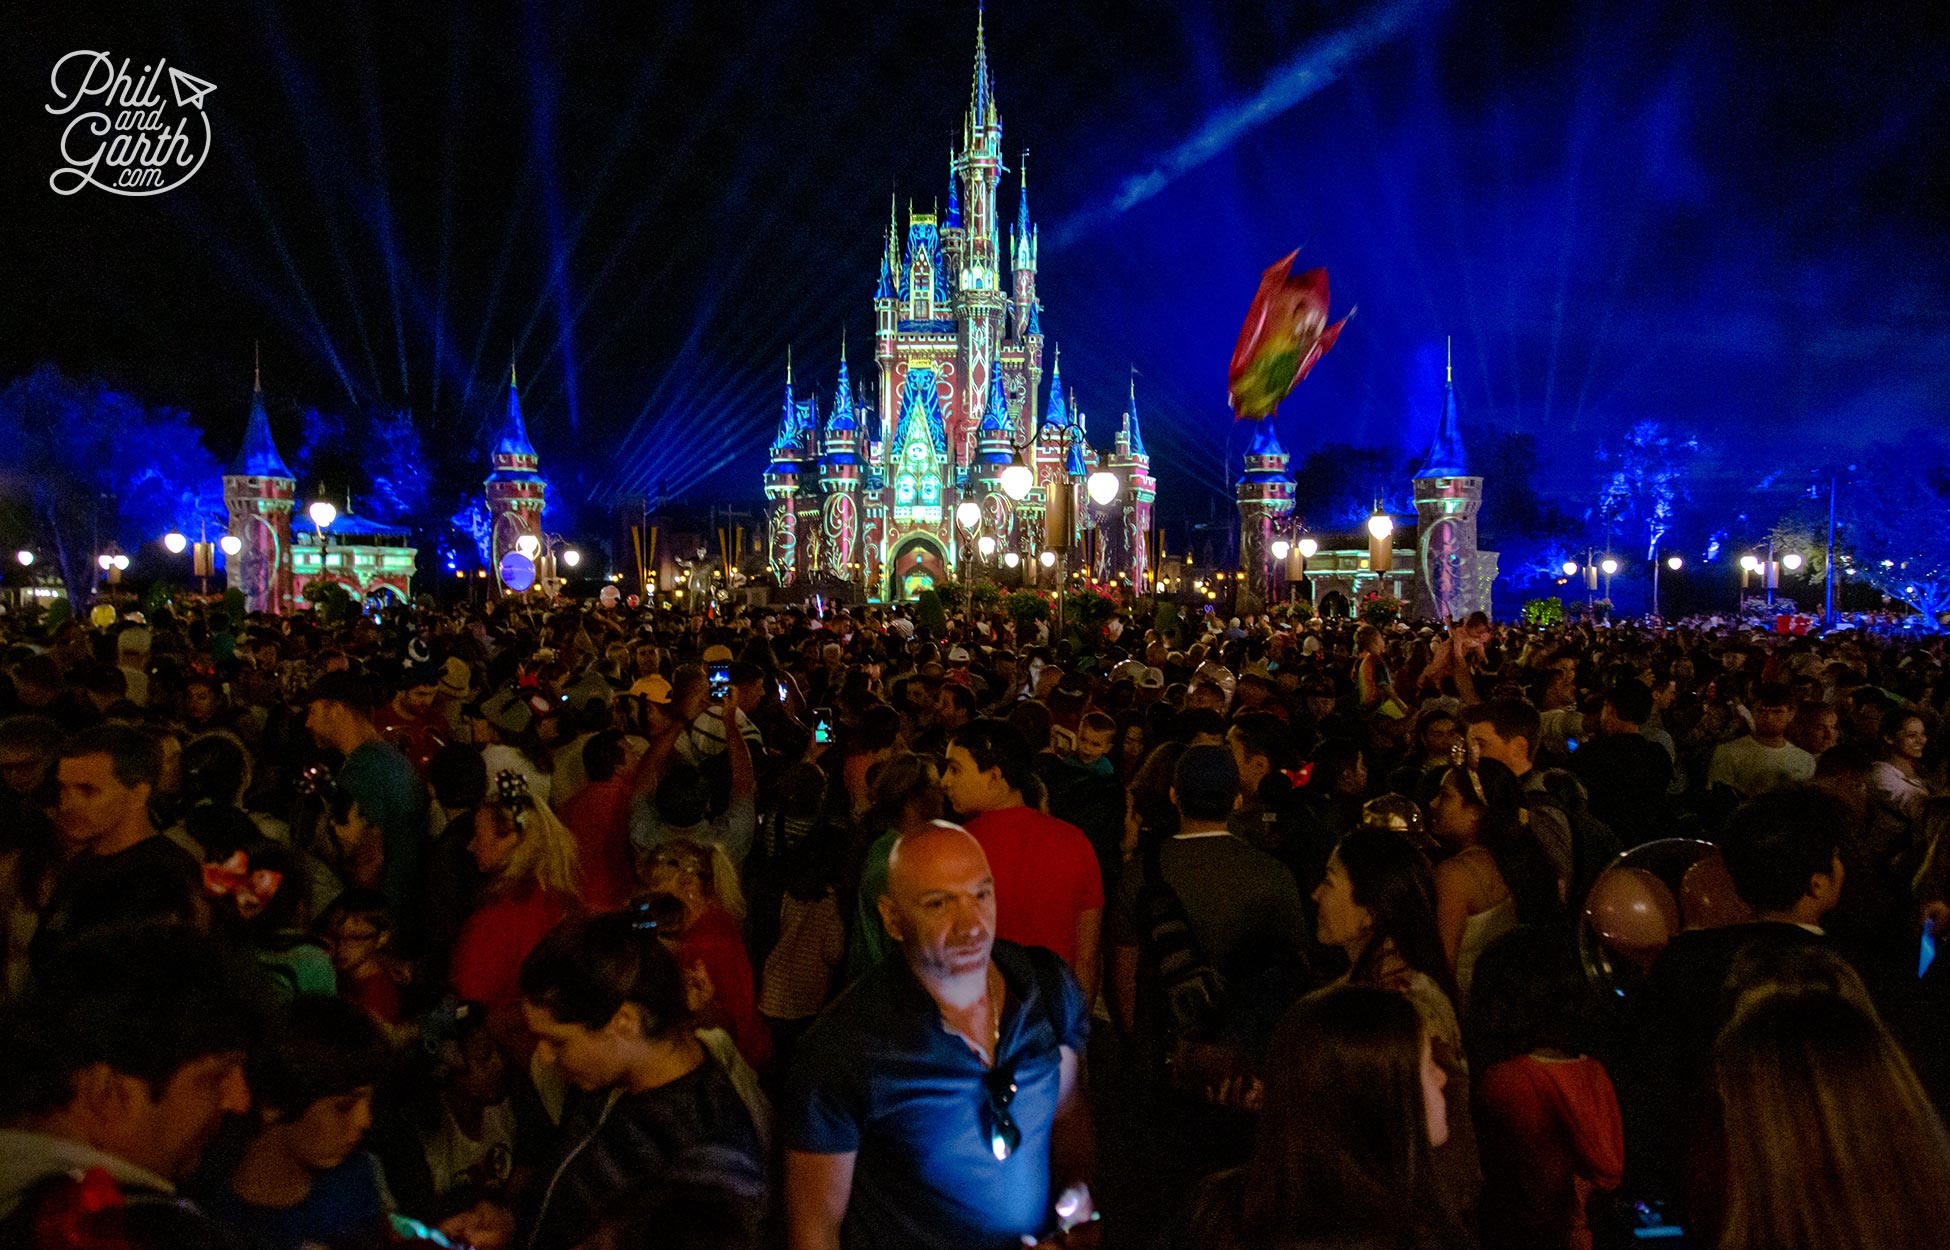 Find a spot amongst the crowds to watch the Happily Ever After Fireworks Show